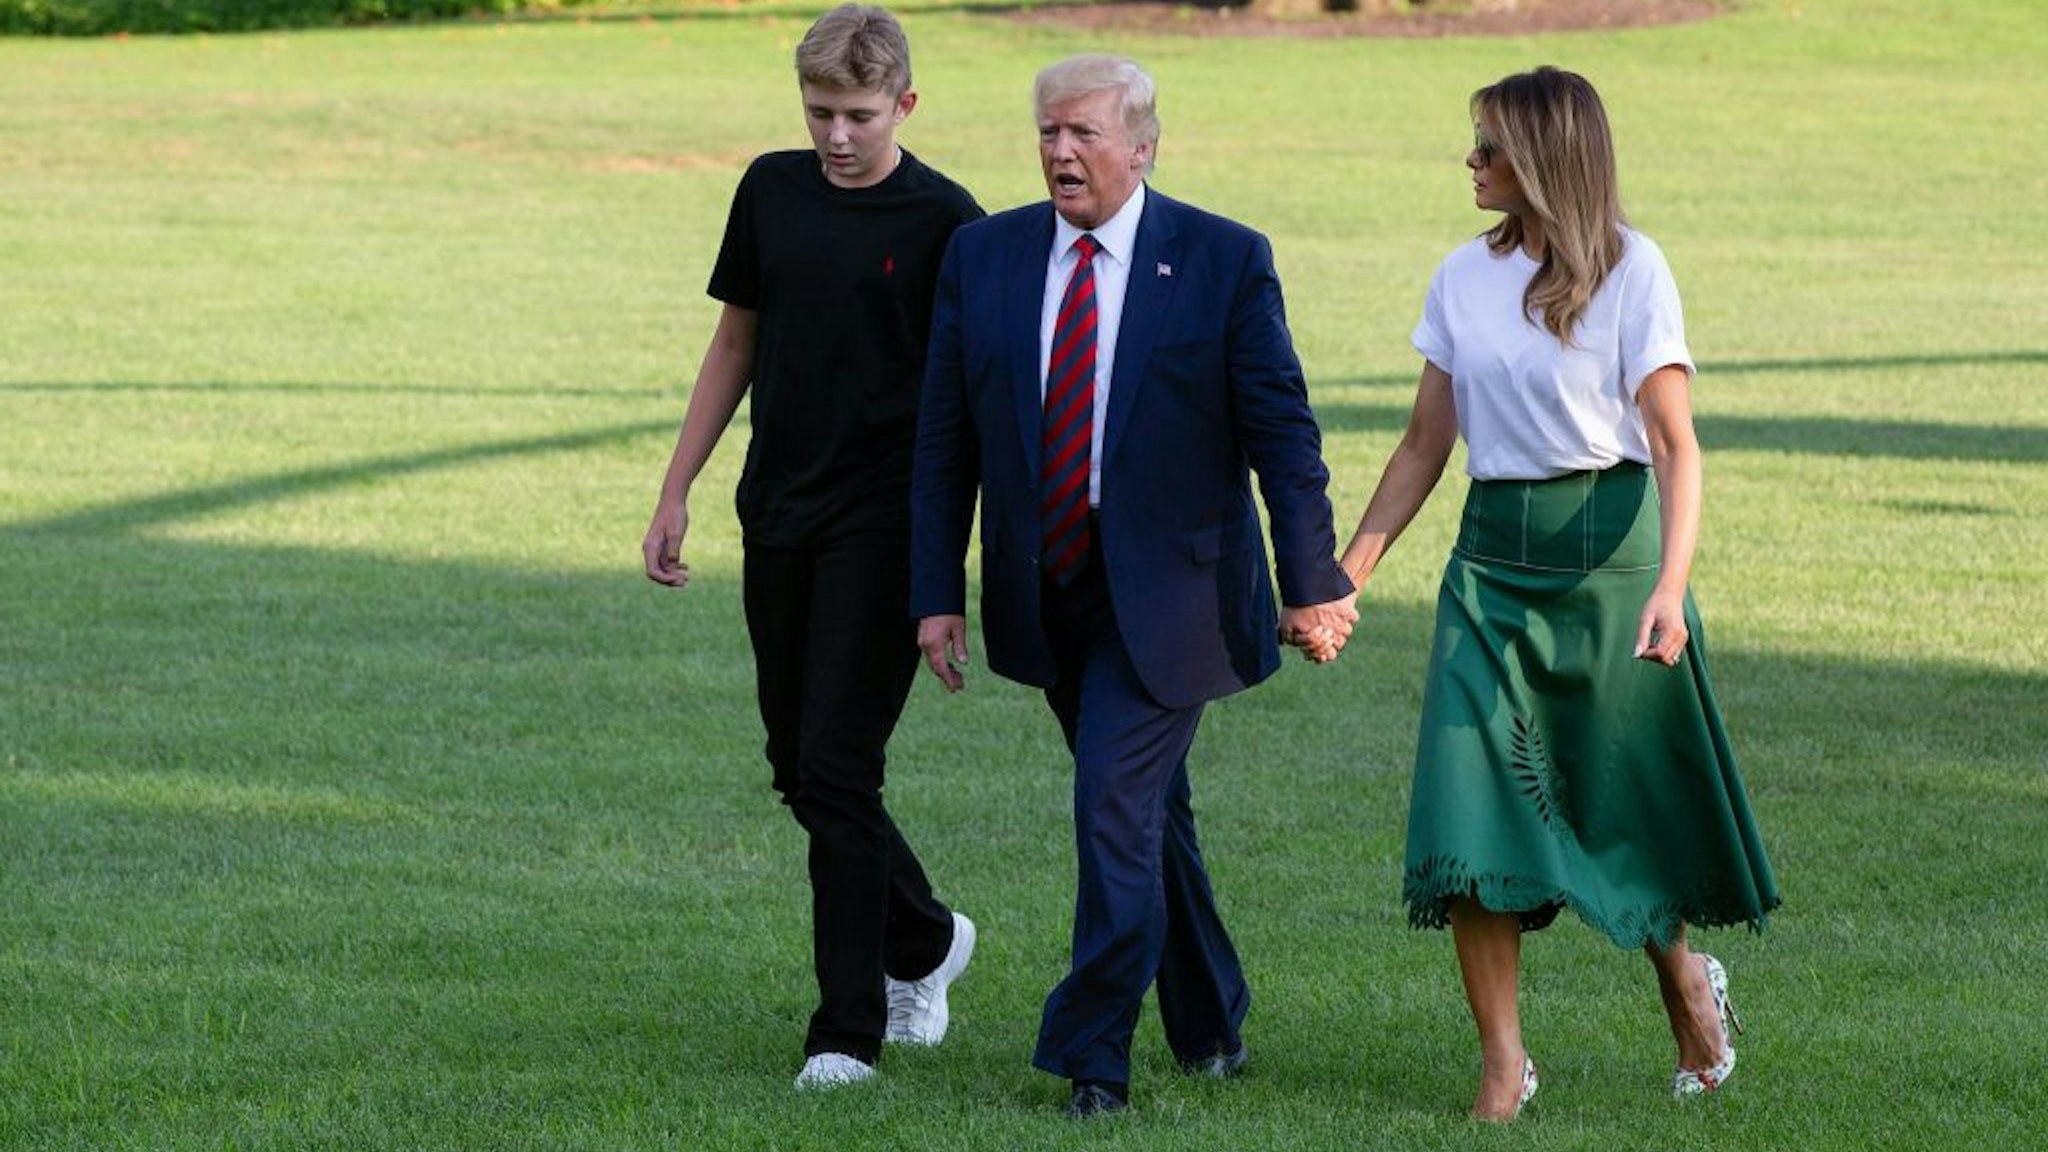 US President Donald Trump (C) First Lady Melania Trump (R) and their son Barron Trump (L) return to the White House after two weeks spent at Trump's golf club in New Jersey on August 18, 2019 in Washington, DC.